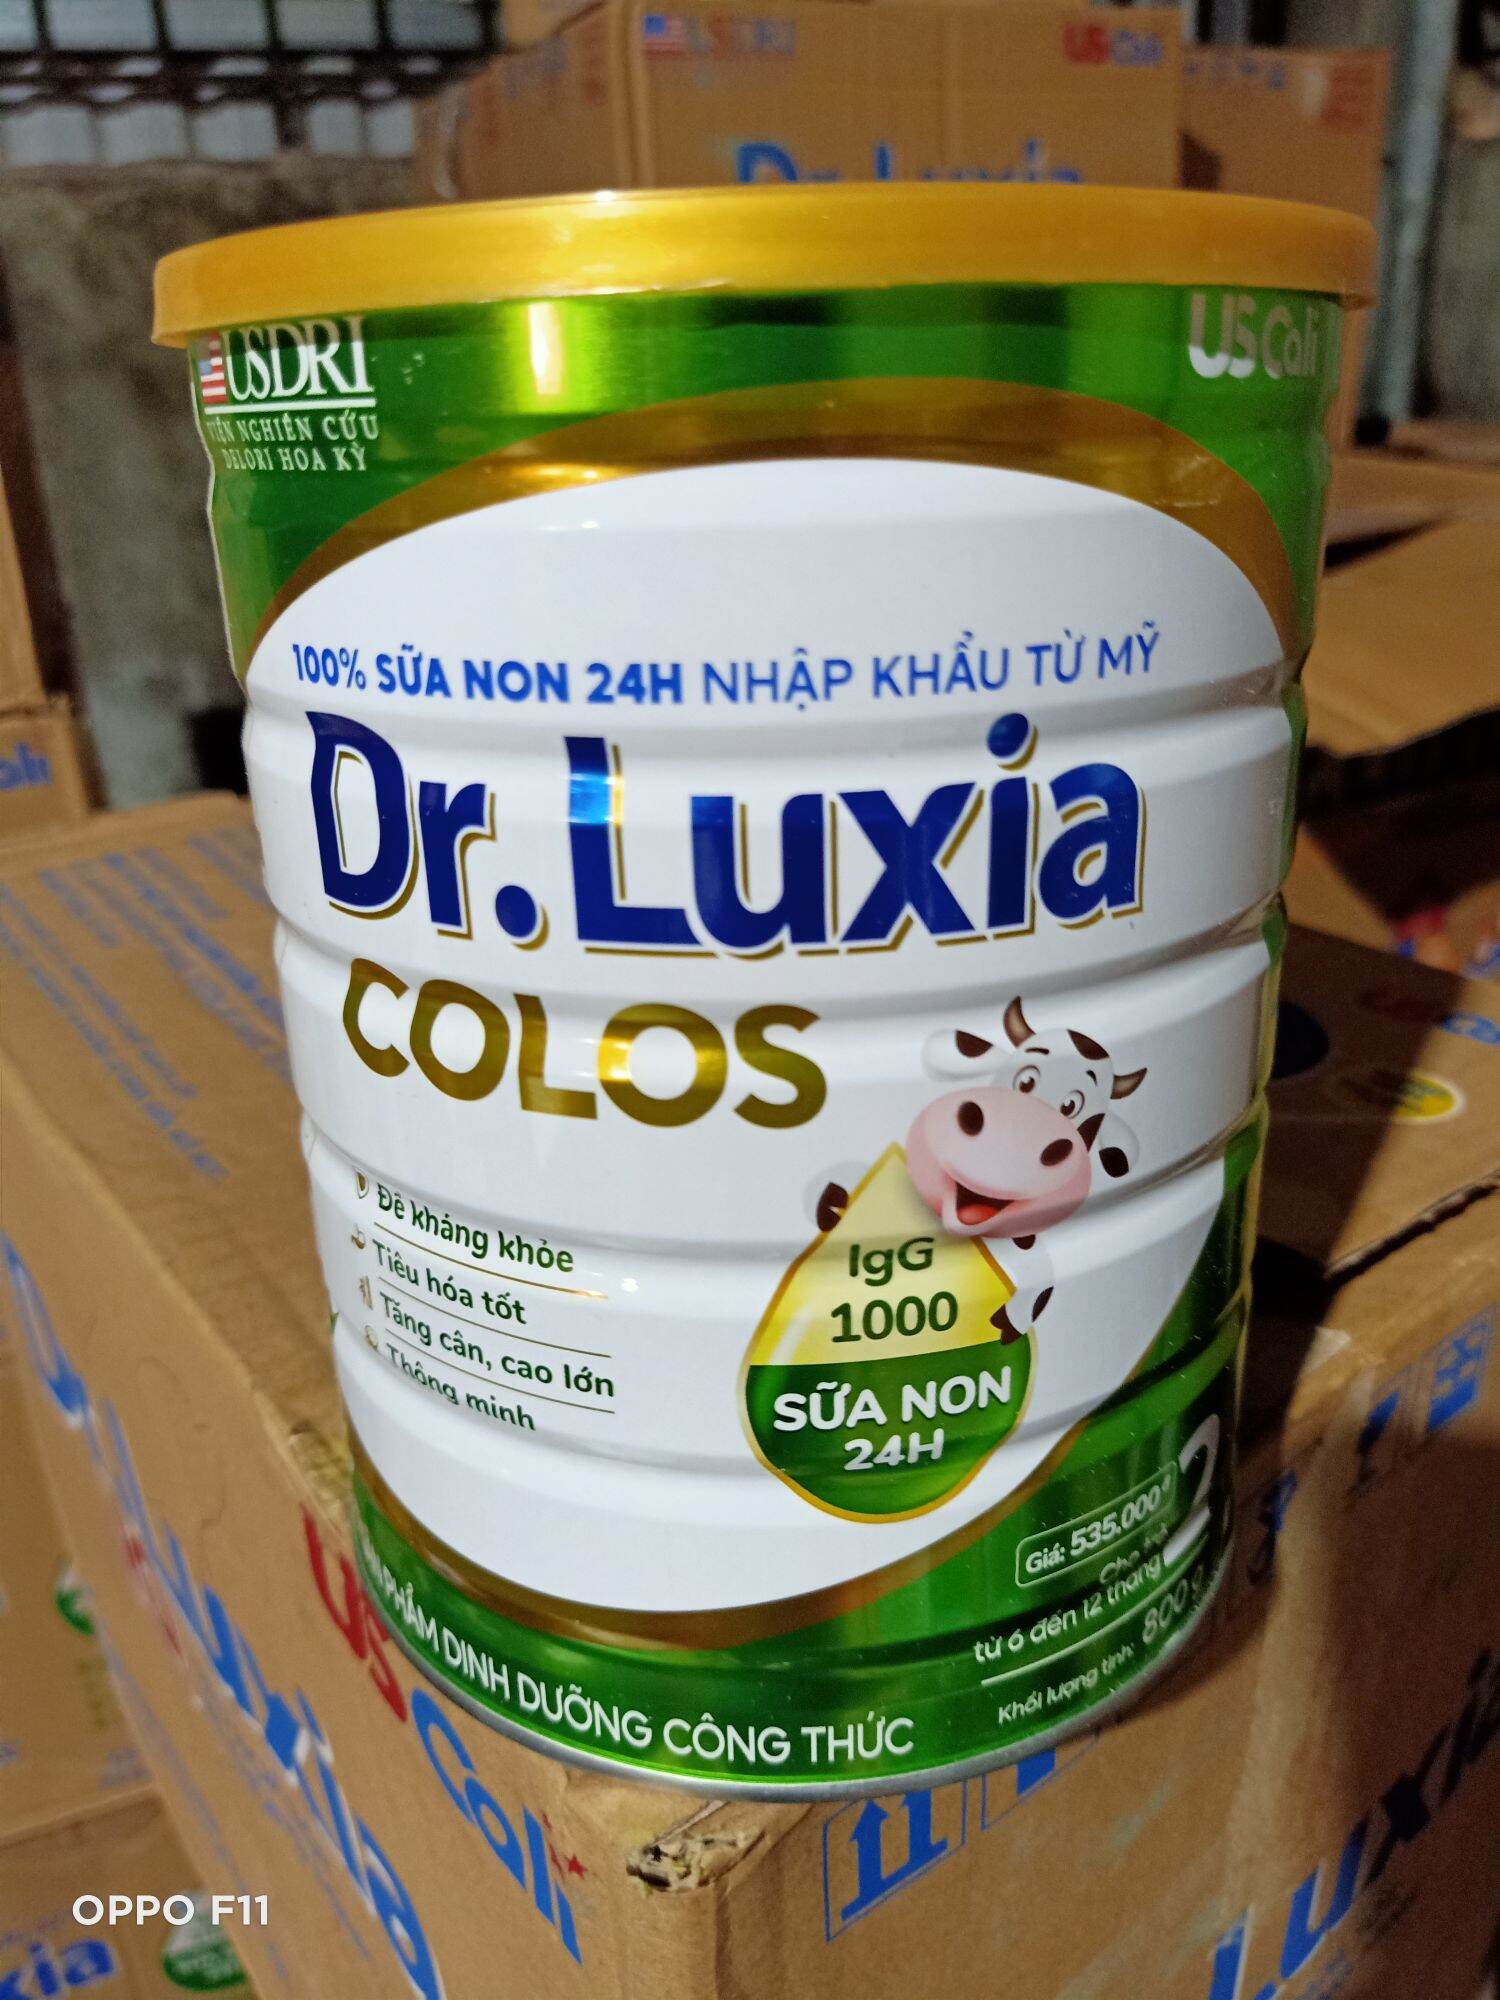 Dr luxia colostrum step 2 800g (6-12 tháng) date mới | Lazada.vn